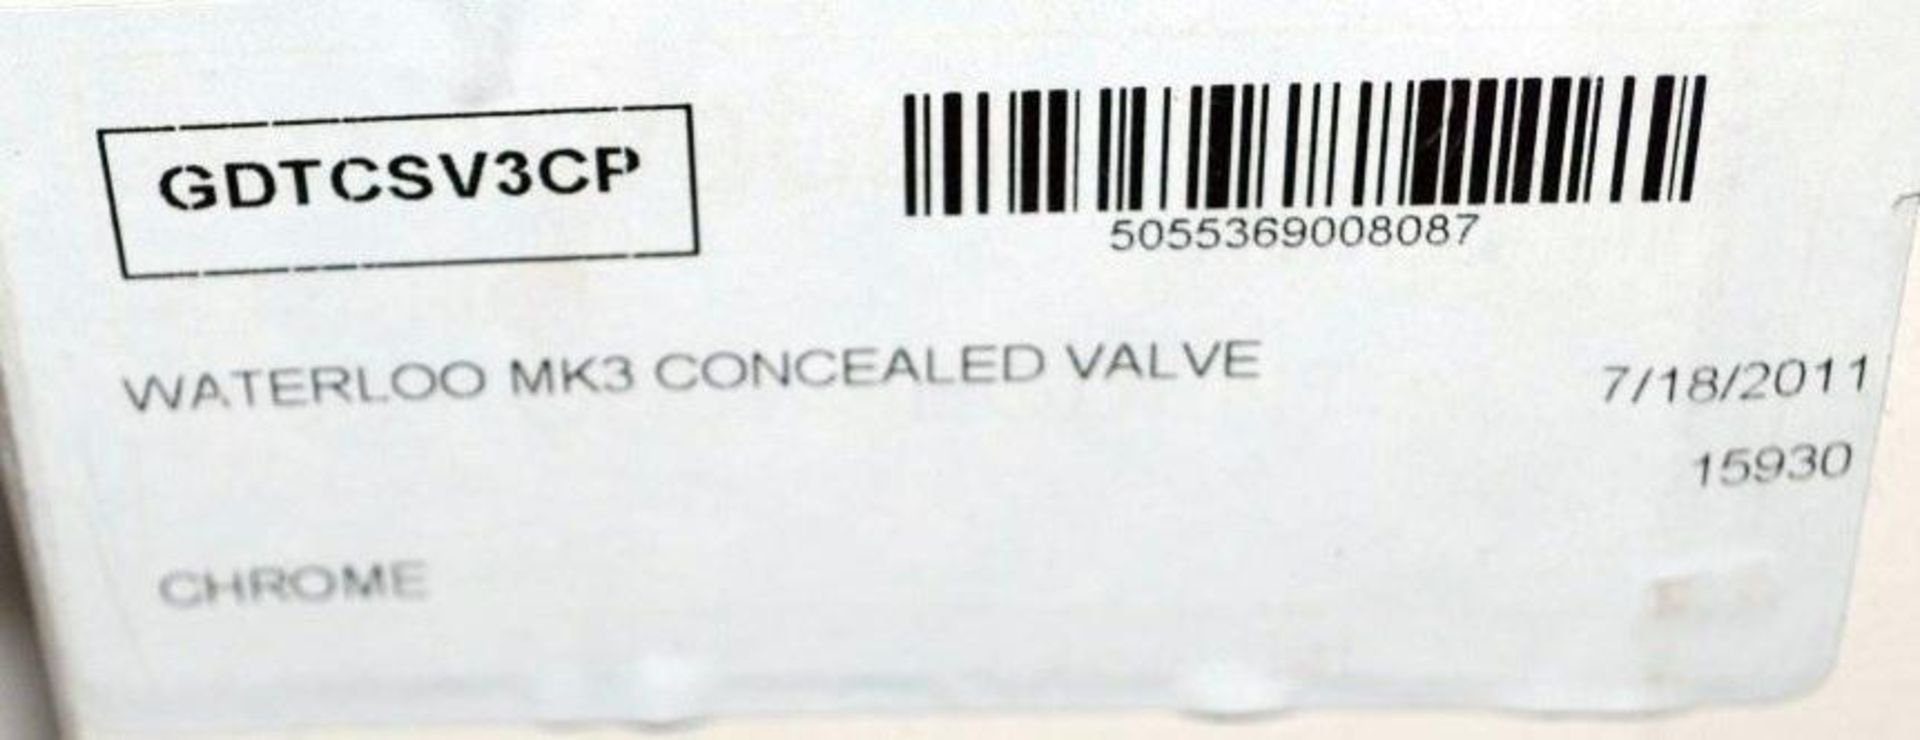 1 x Waterloo MK3 Concealed Shower Valve - Manufactured by Grange - New / Unused Boxed Stock, Supplie - Image 6 of 6